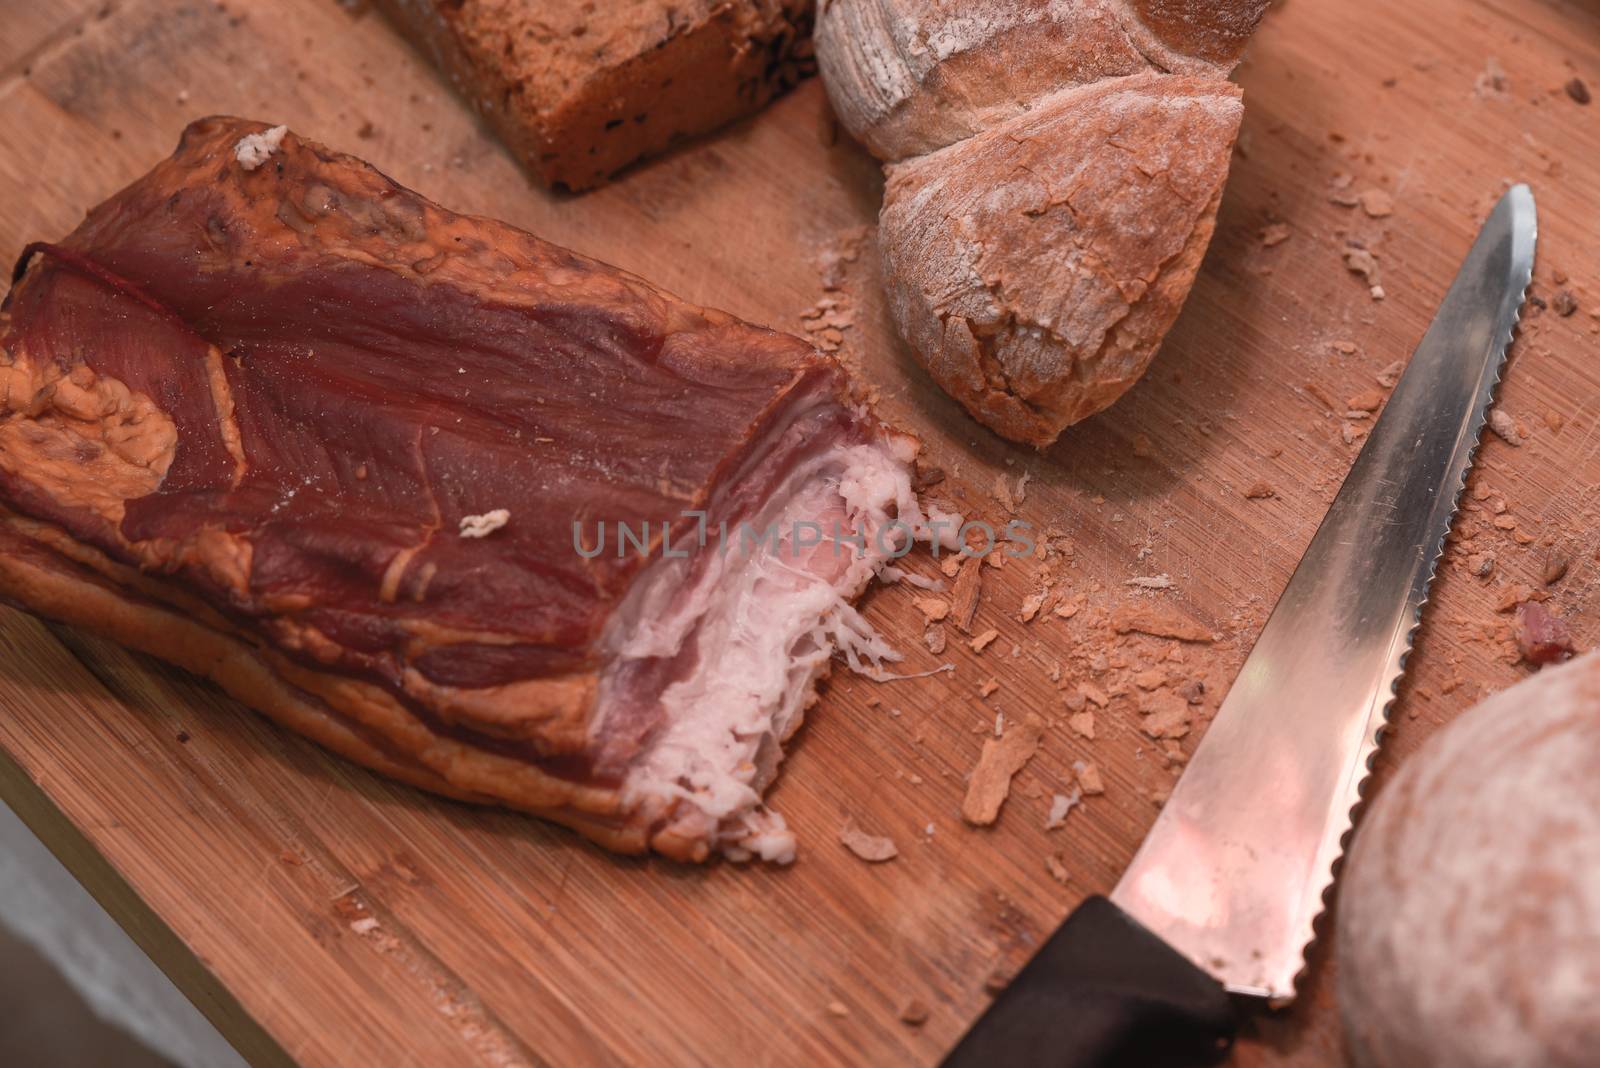 Smoked bacon with bread and knife on cutting board